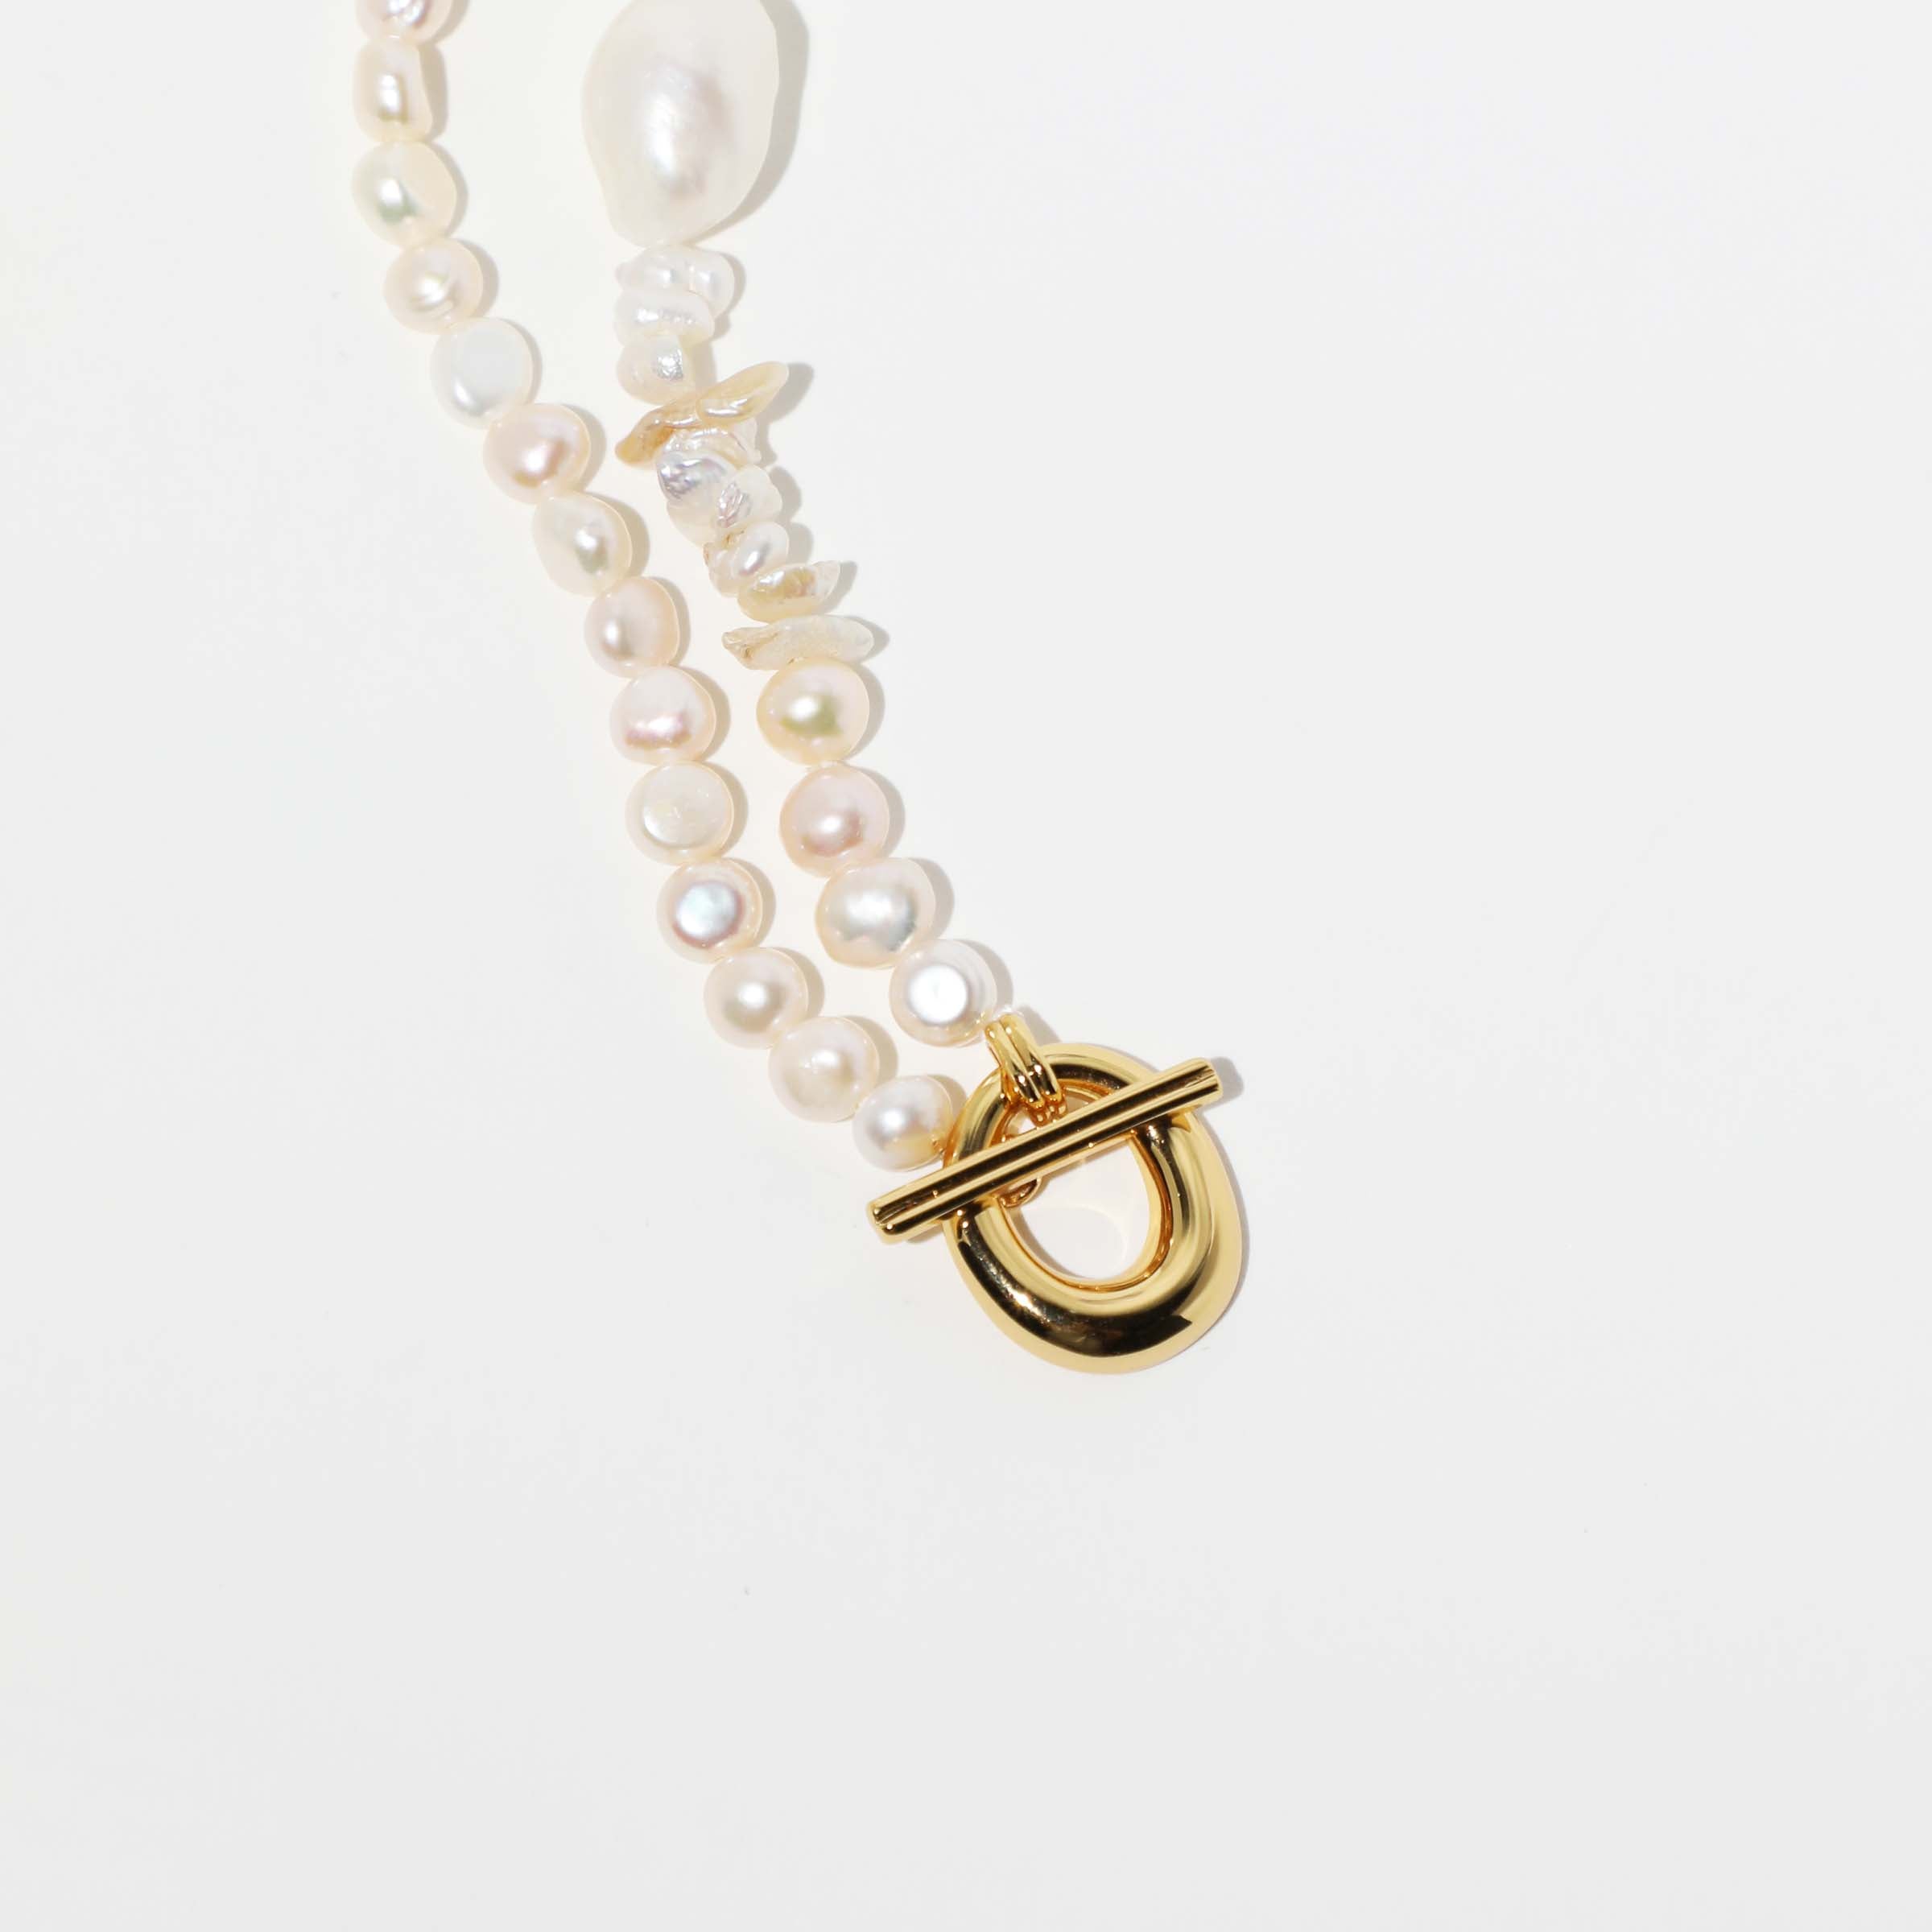 Serenity Pearl Beaded T-Bar Necklace in Gold flat lay